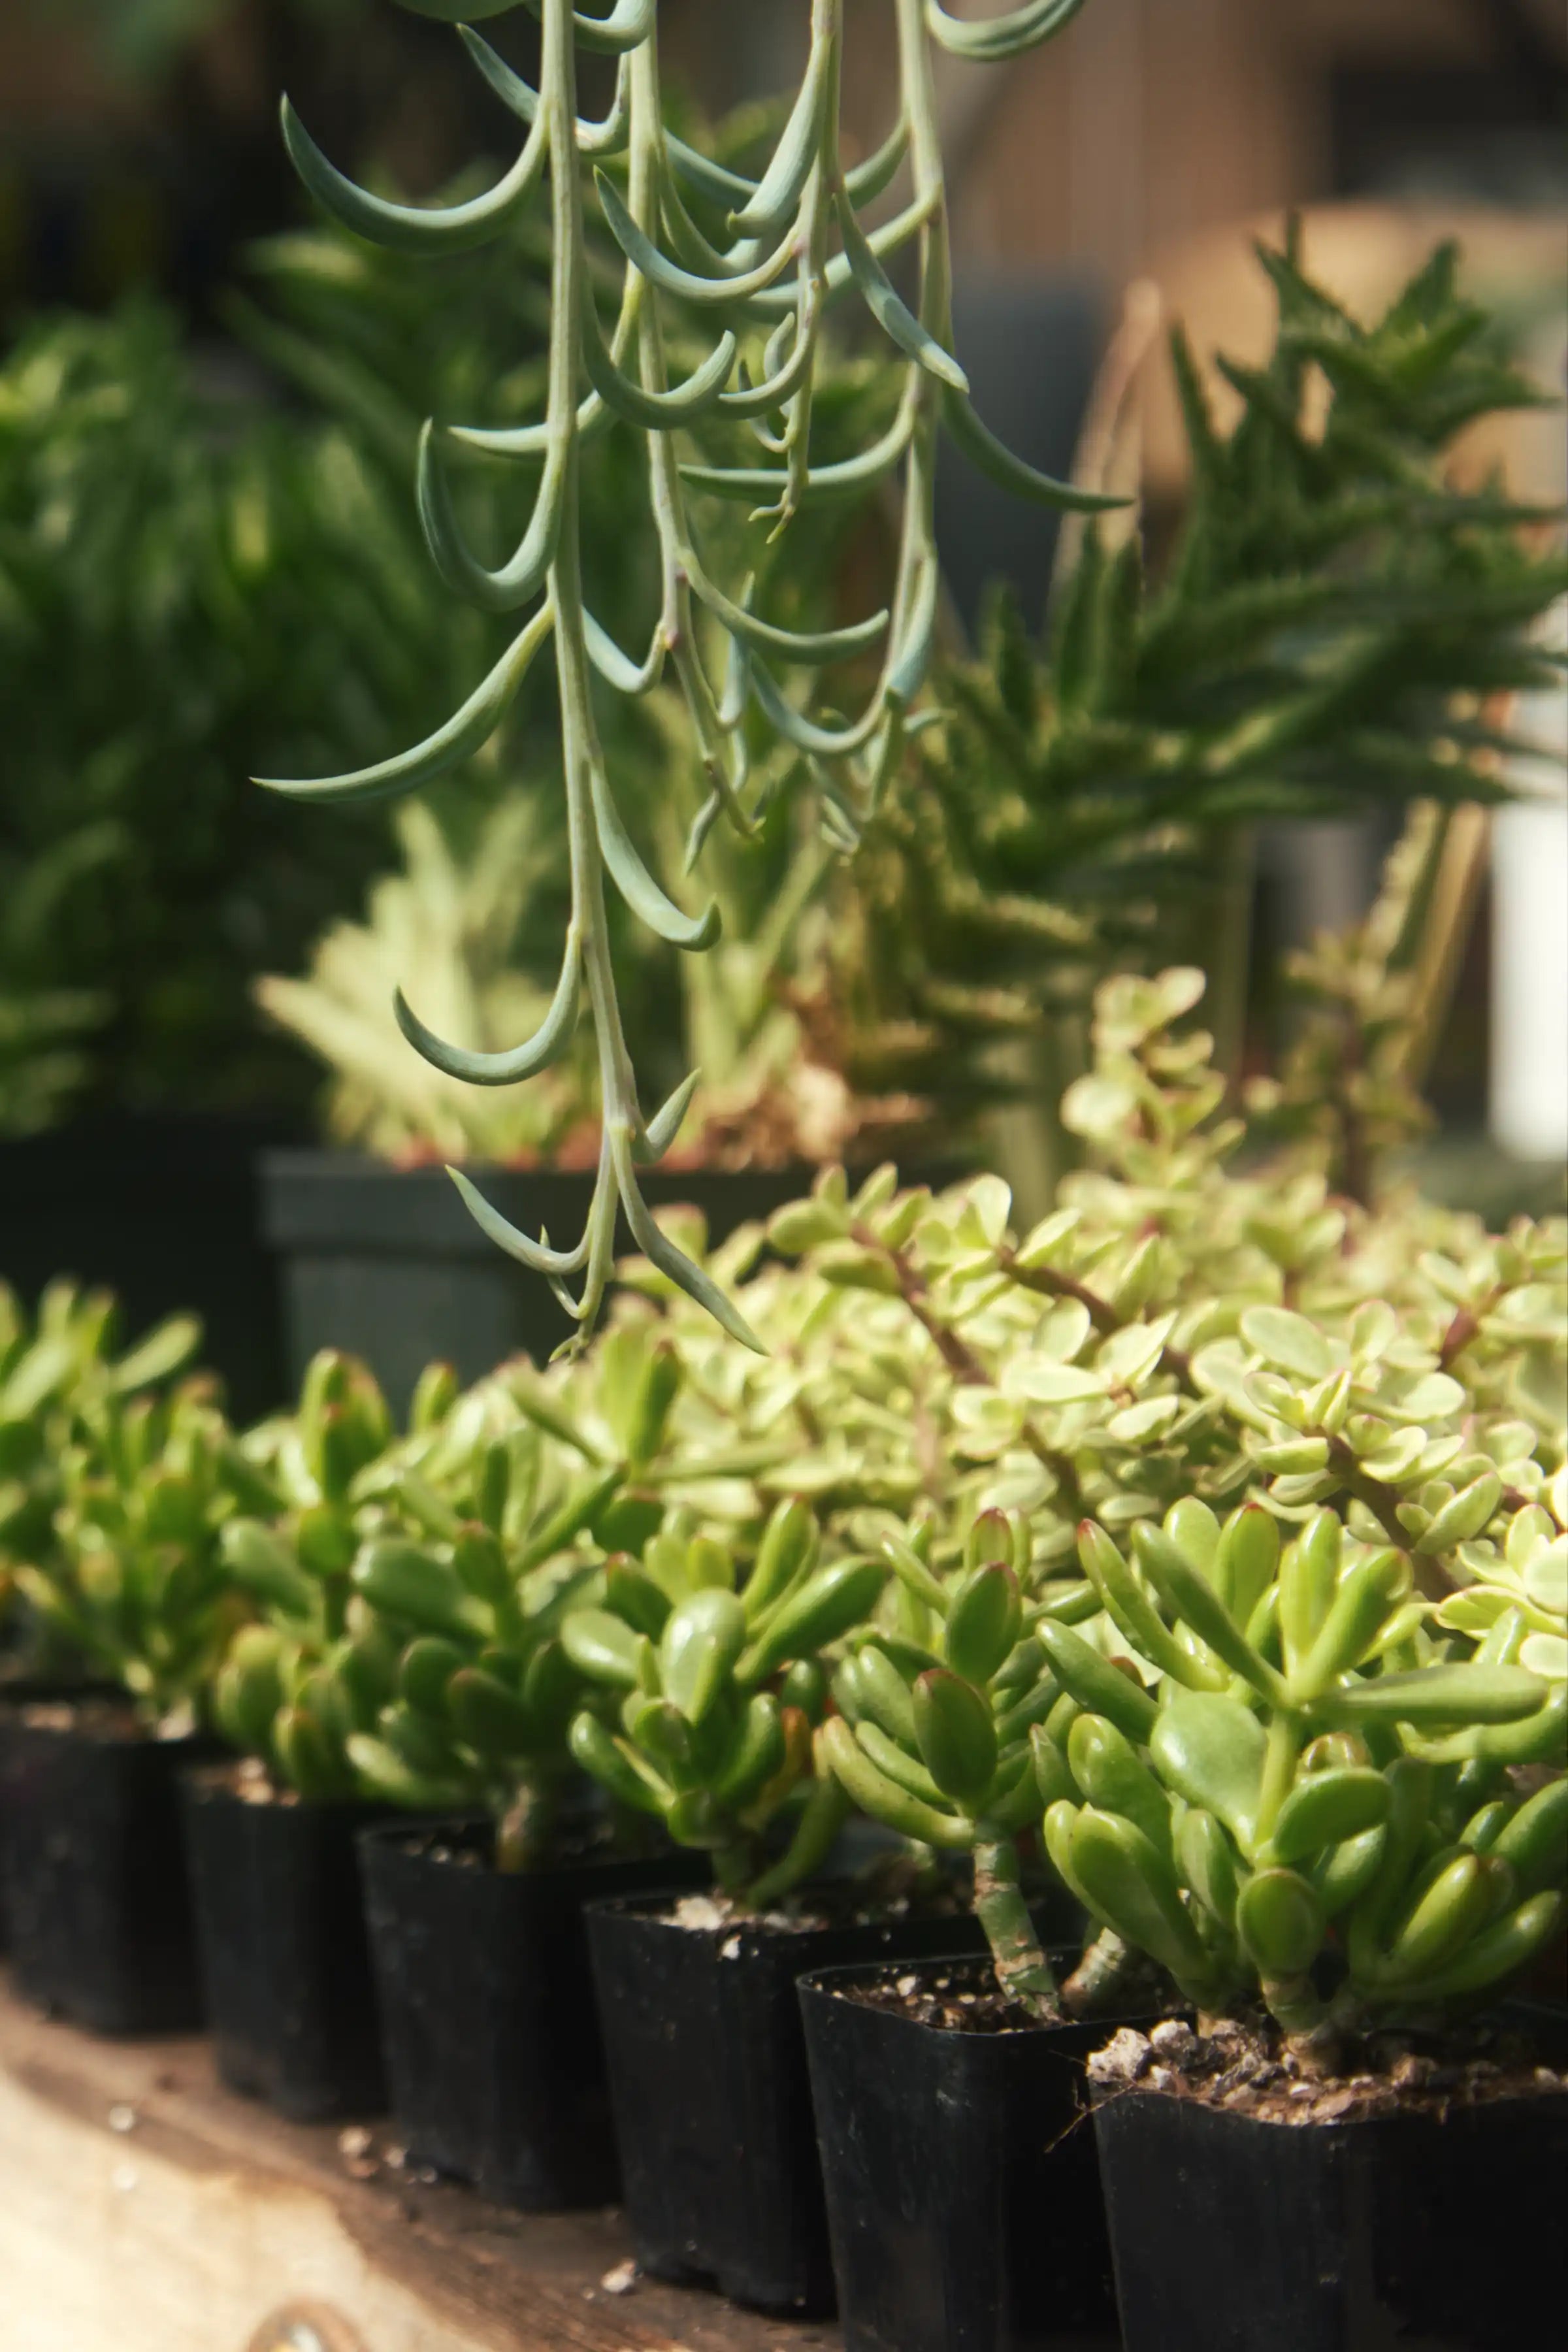 A photograph of small succulents found at Phelan Gardens